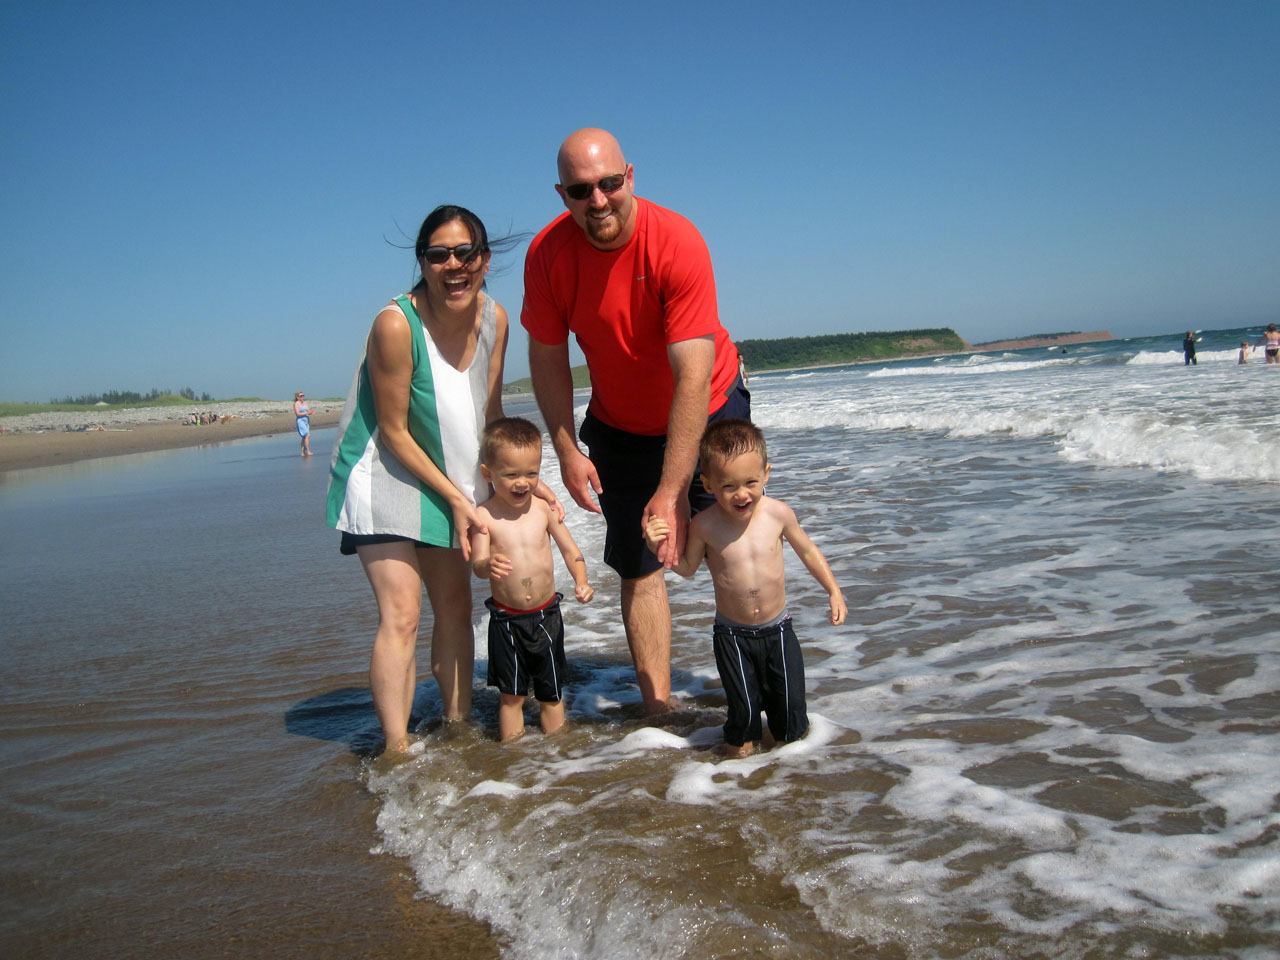 My three-year-old boys loved their first time in the ocean, Lawrencetown Beach, Nova Scotia. Photo courtesy Mimi Li Mulhall